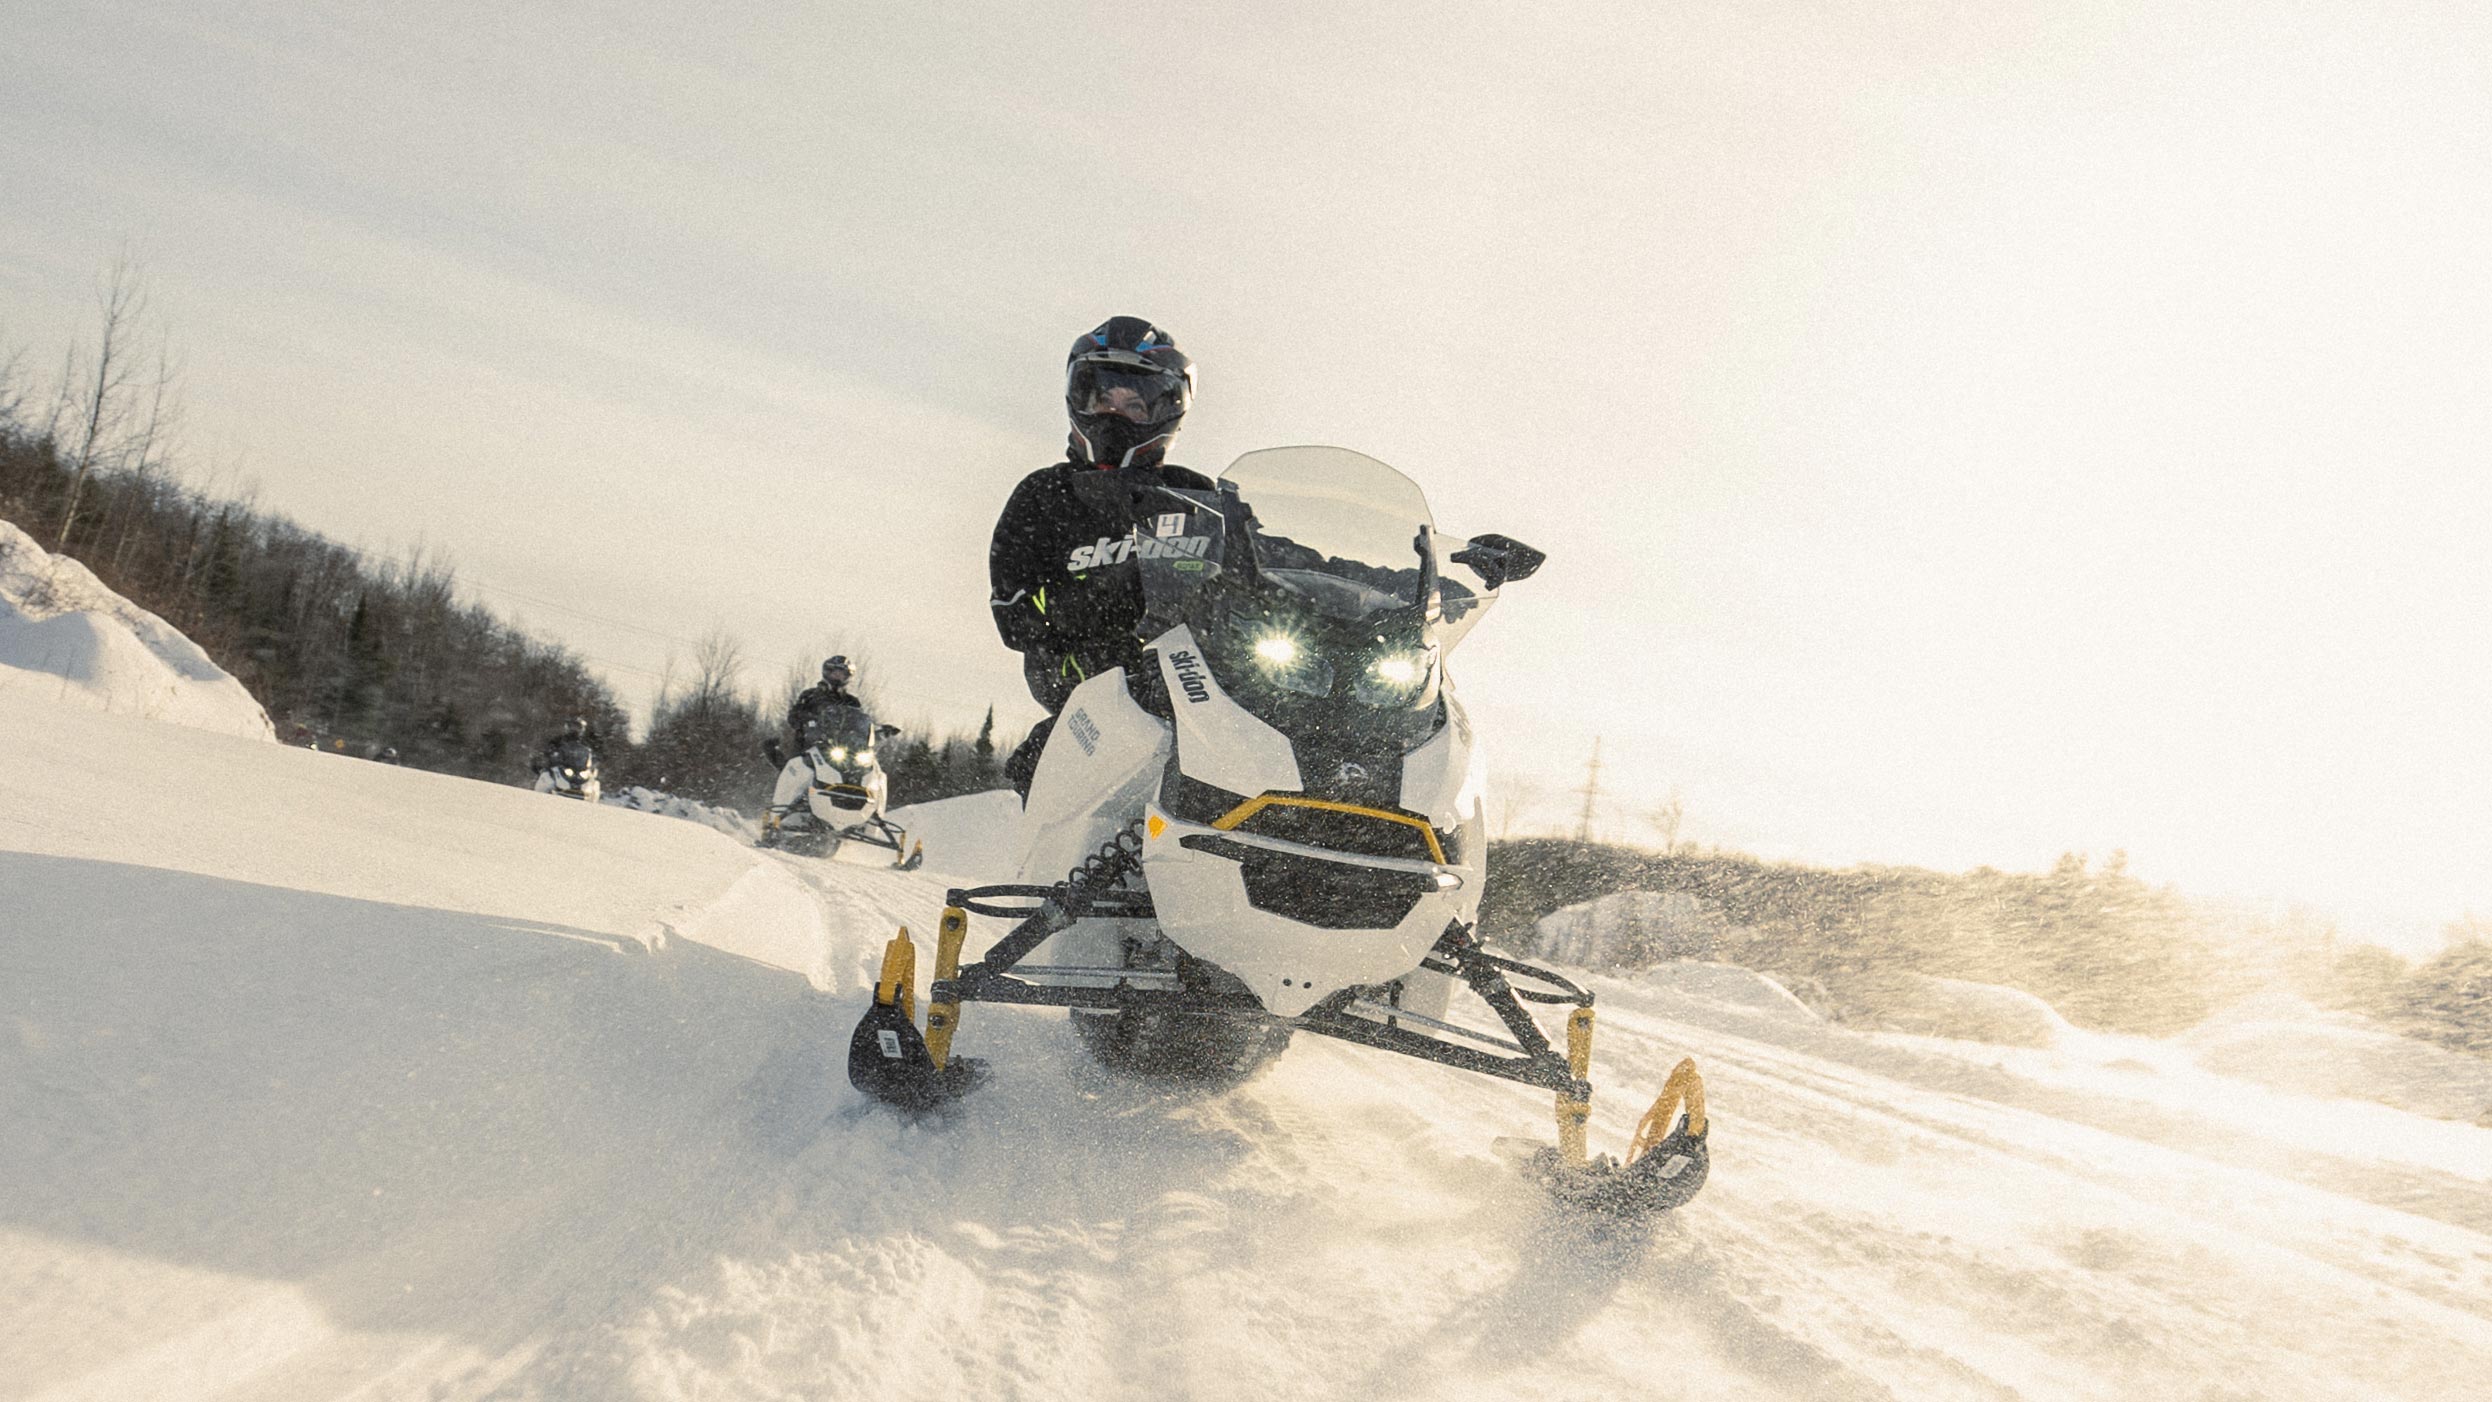 Ski-Doo Grand Touring Electric Sleds in trail